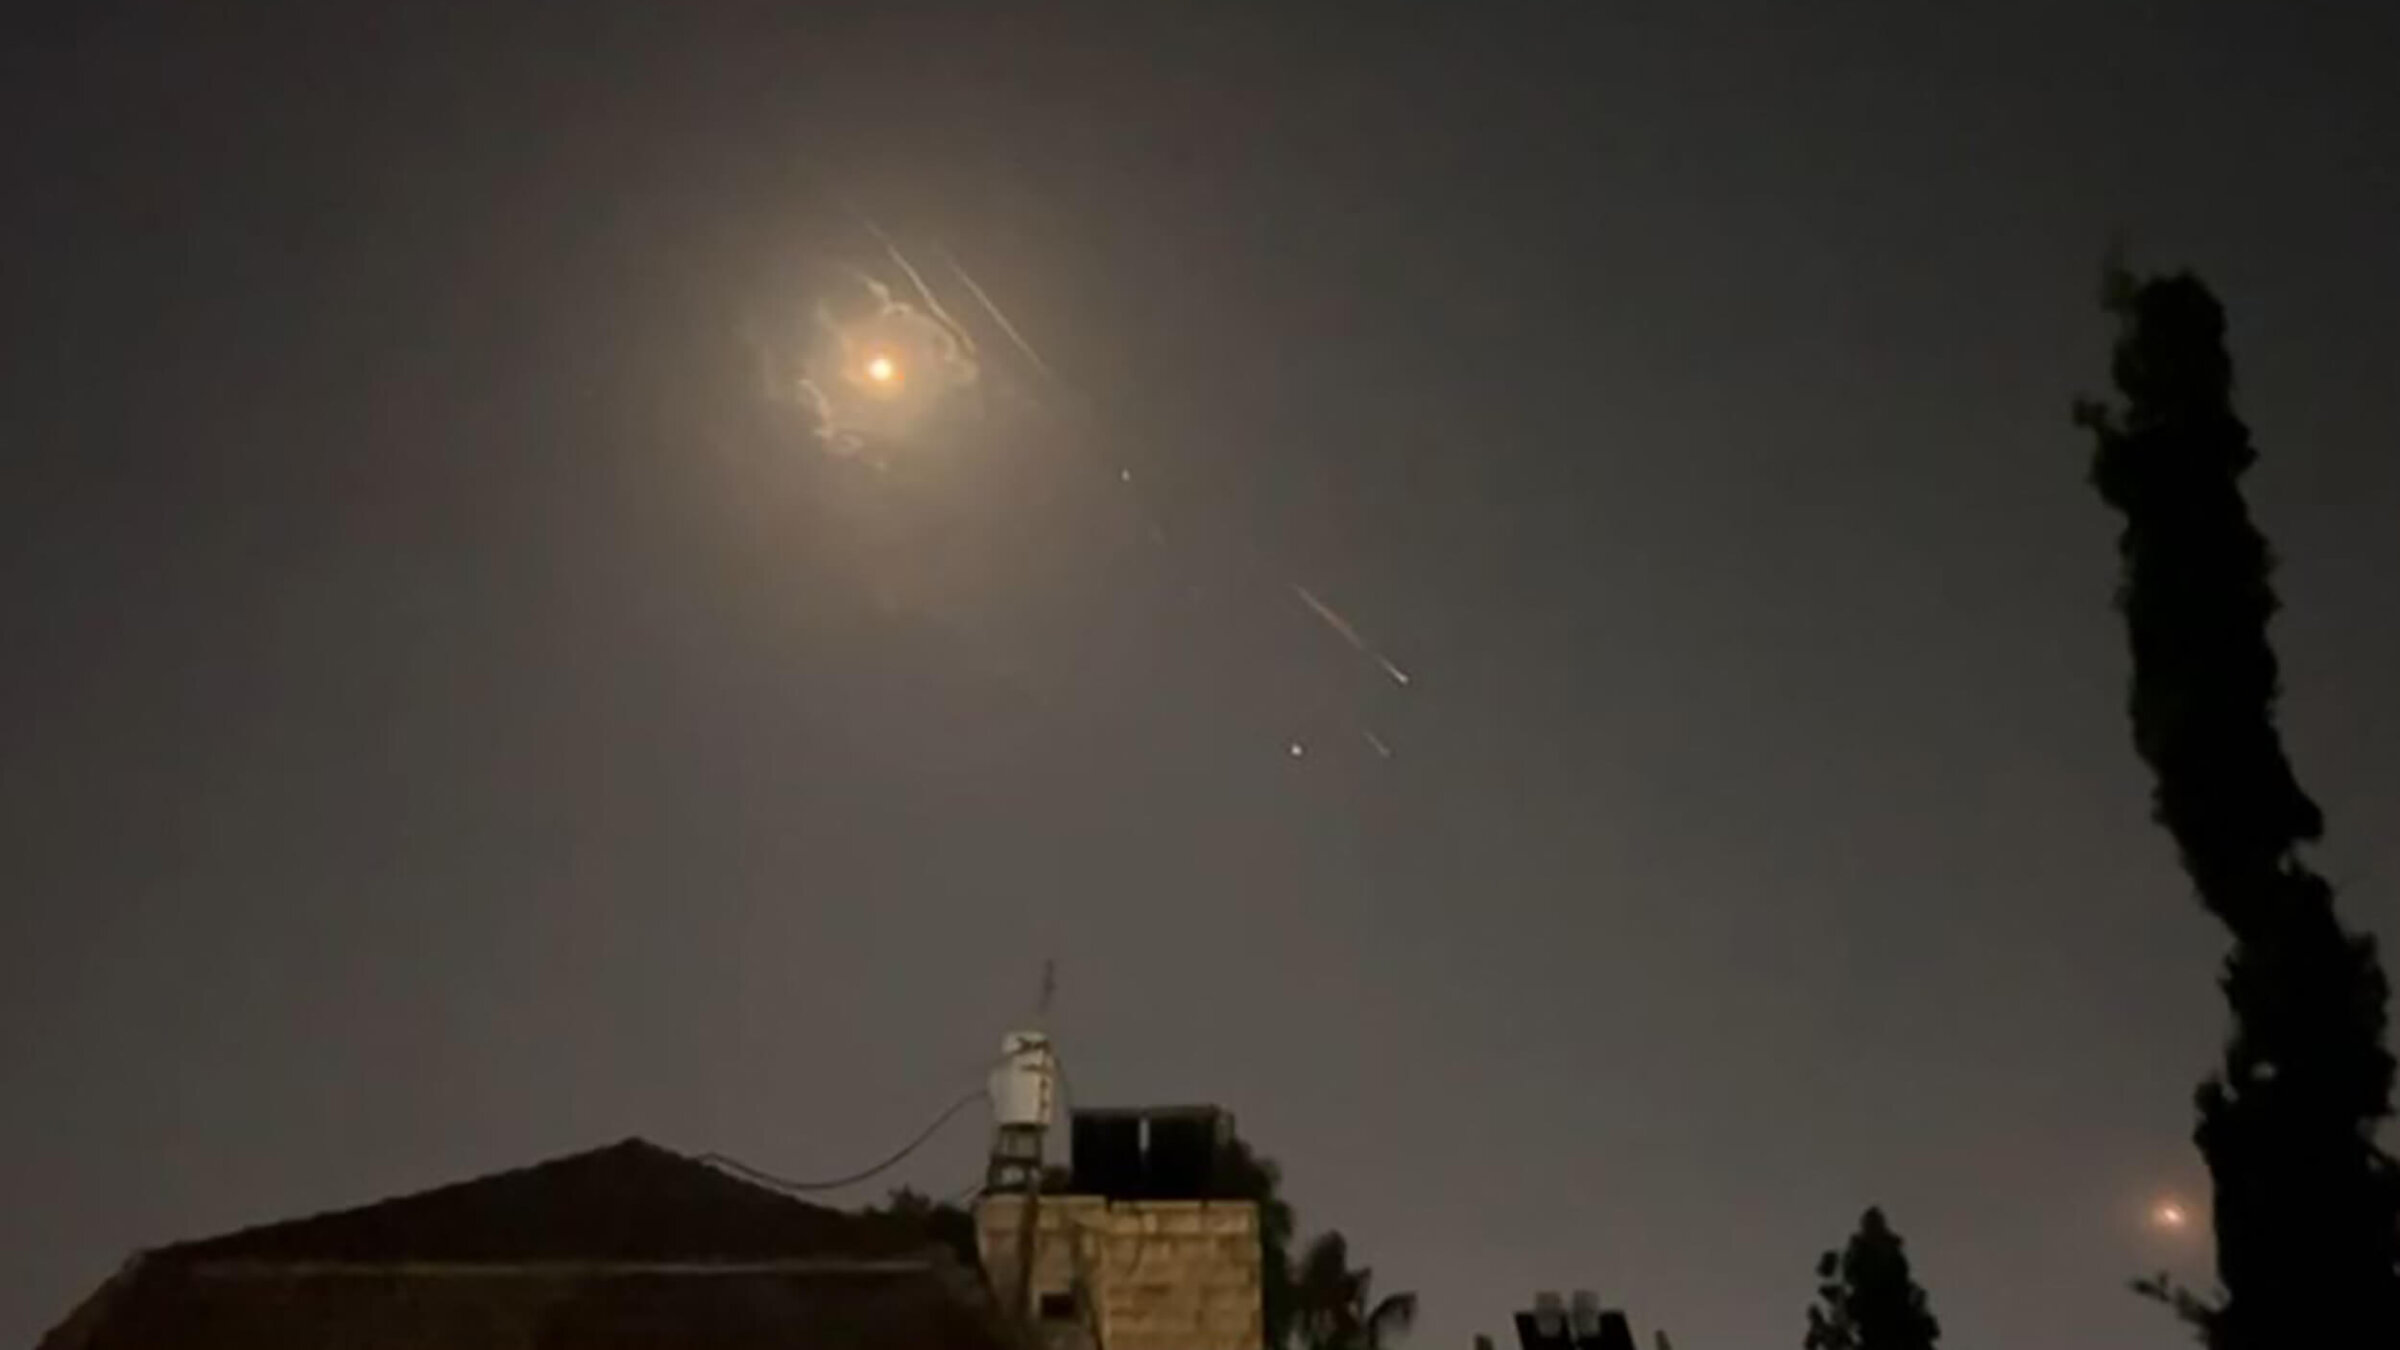 Explosions lit up the sky over Jerusalem as missile defense systems worked to intercept an Iranian attack on Israel.